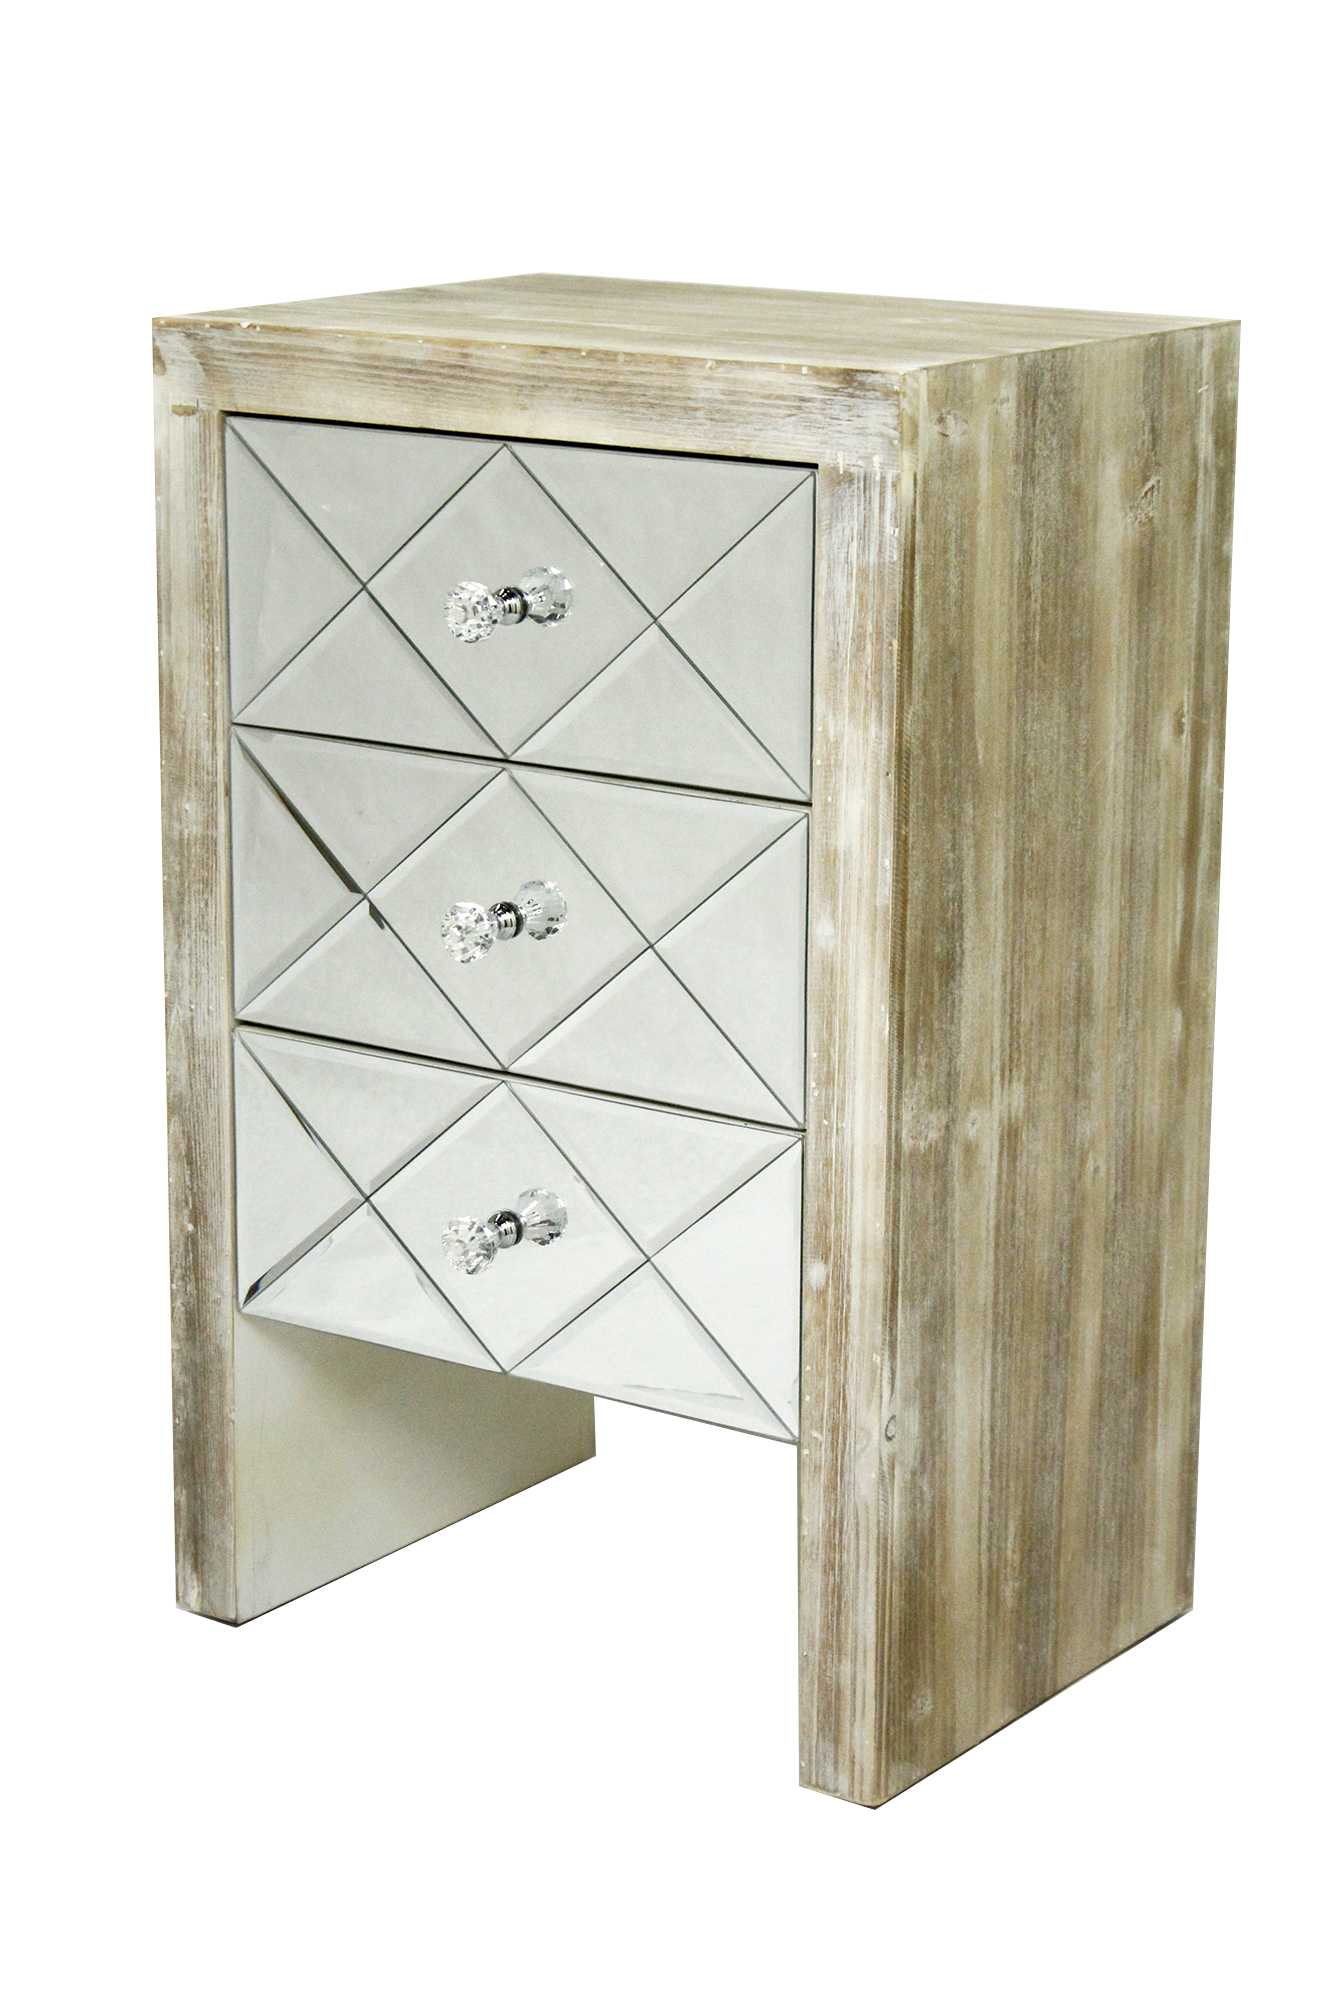 17.7" X 13" X 28" White Washed MDF Wood Mirrored Glass Accent Cabinet with Mirrored Glass Drawers